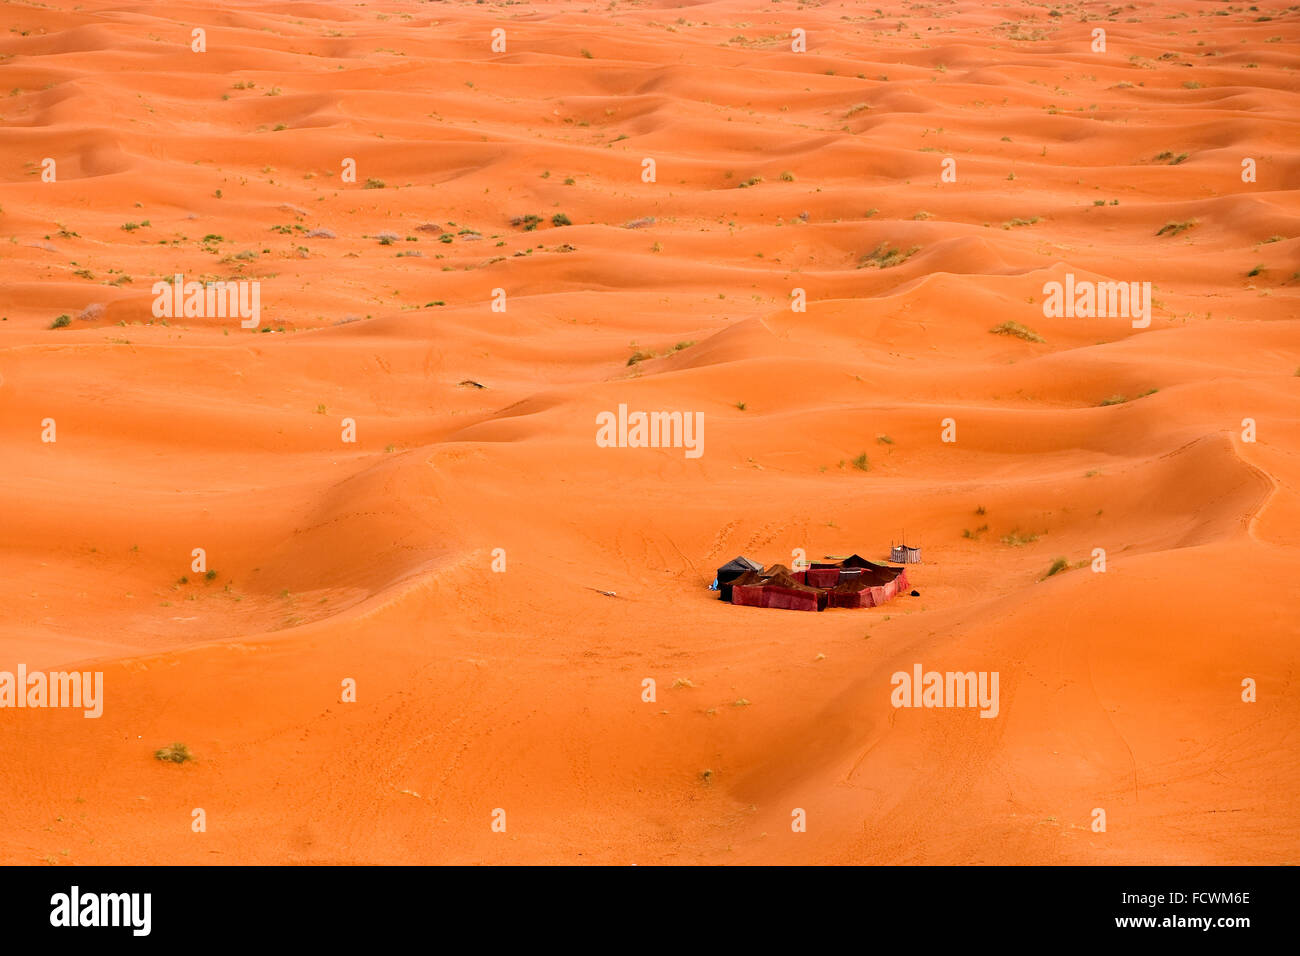 A bedouin tent camp in the desert Stock Photo